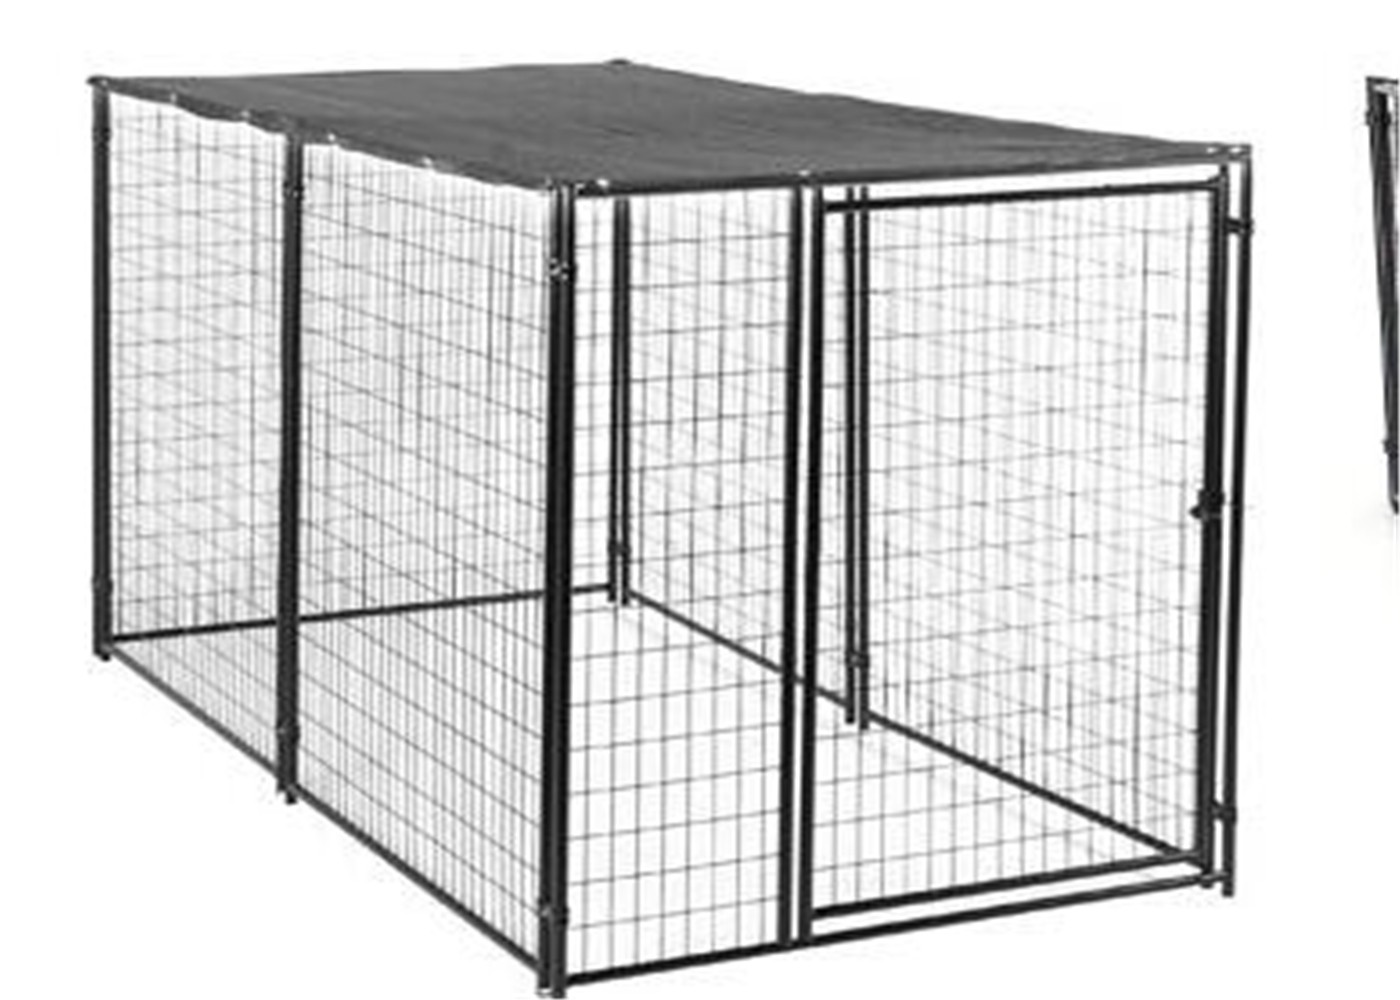 Outdoor Dog Kennels: Ultimate Comfort and Security for Your Pet